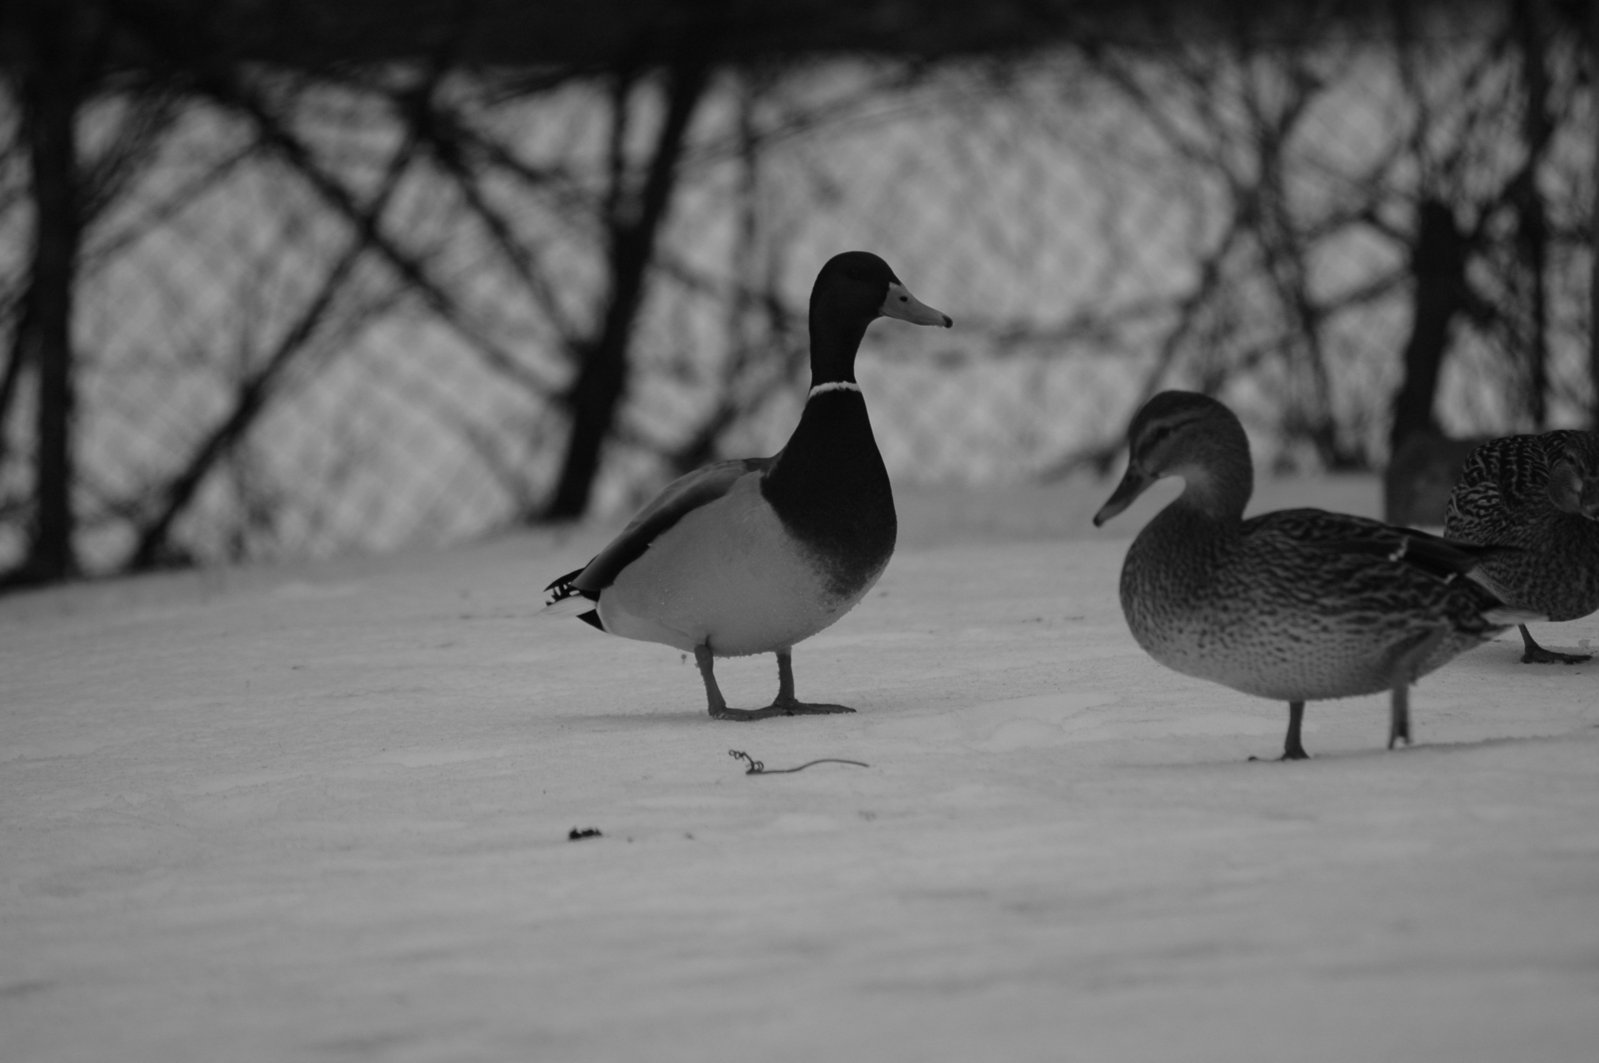 two ducks stand outside in the snow near trees